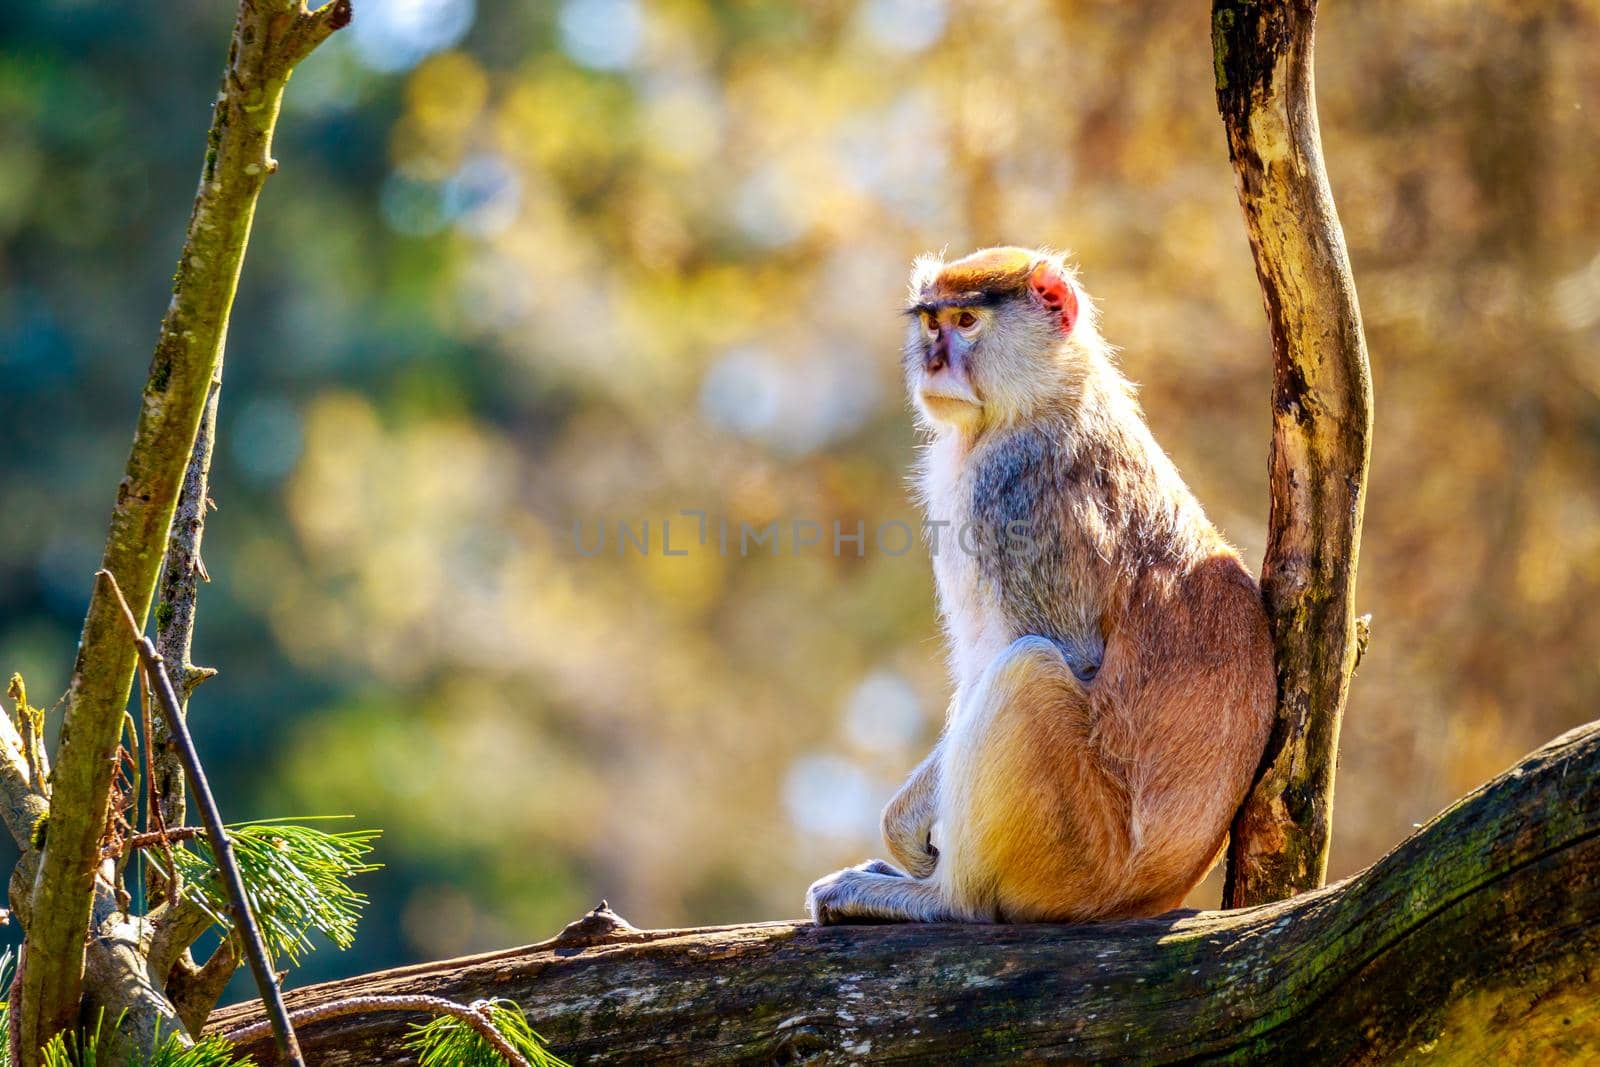 Patas Monkey on Tree Branch by gepeng